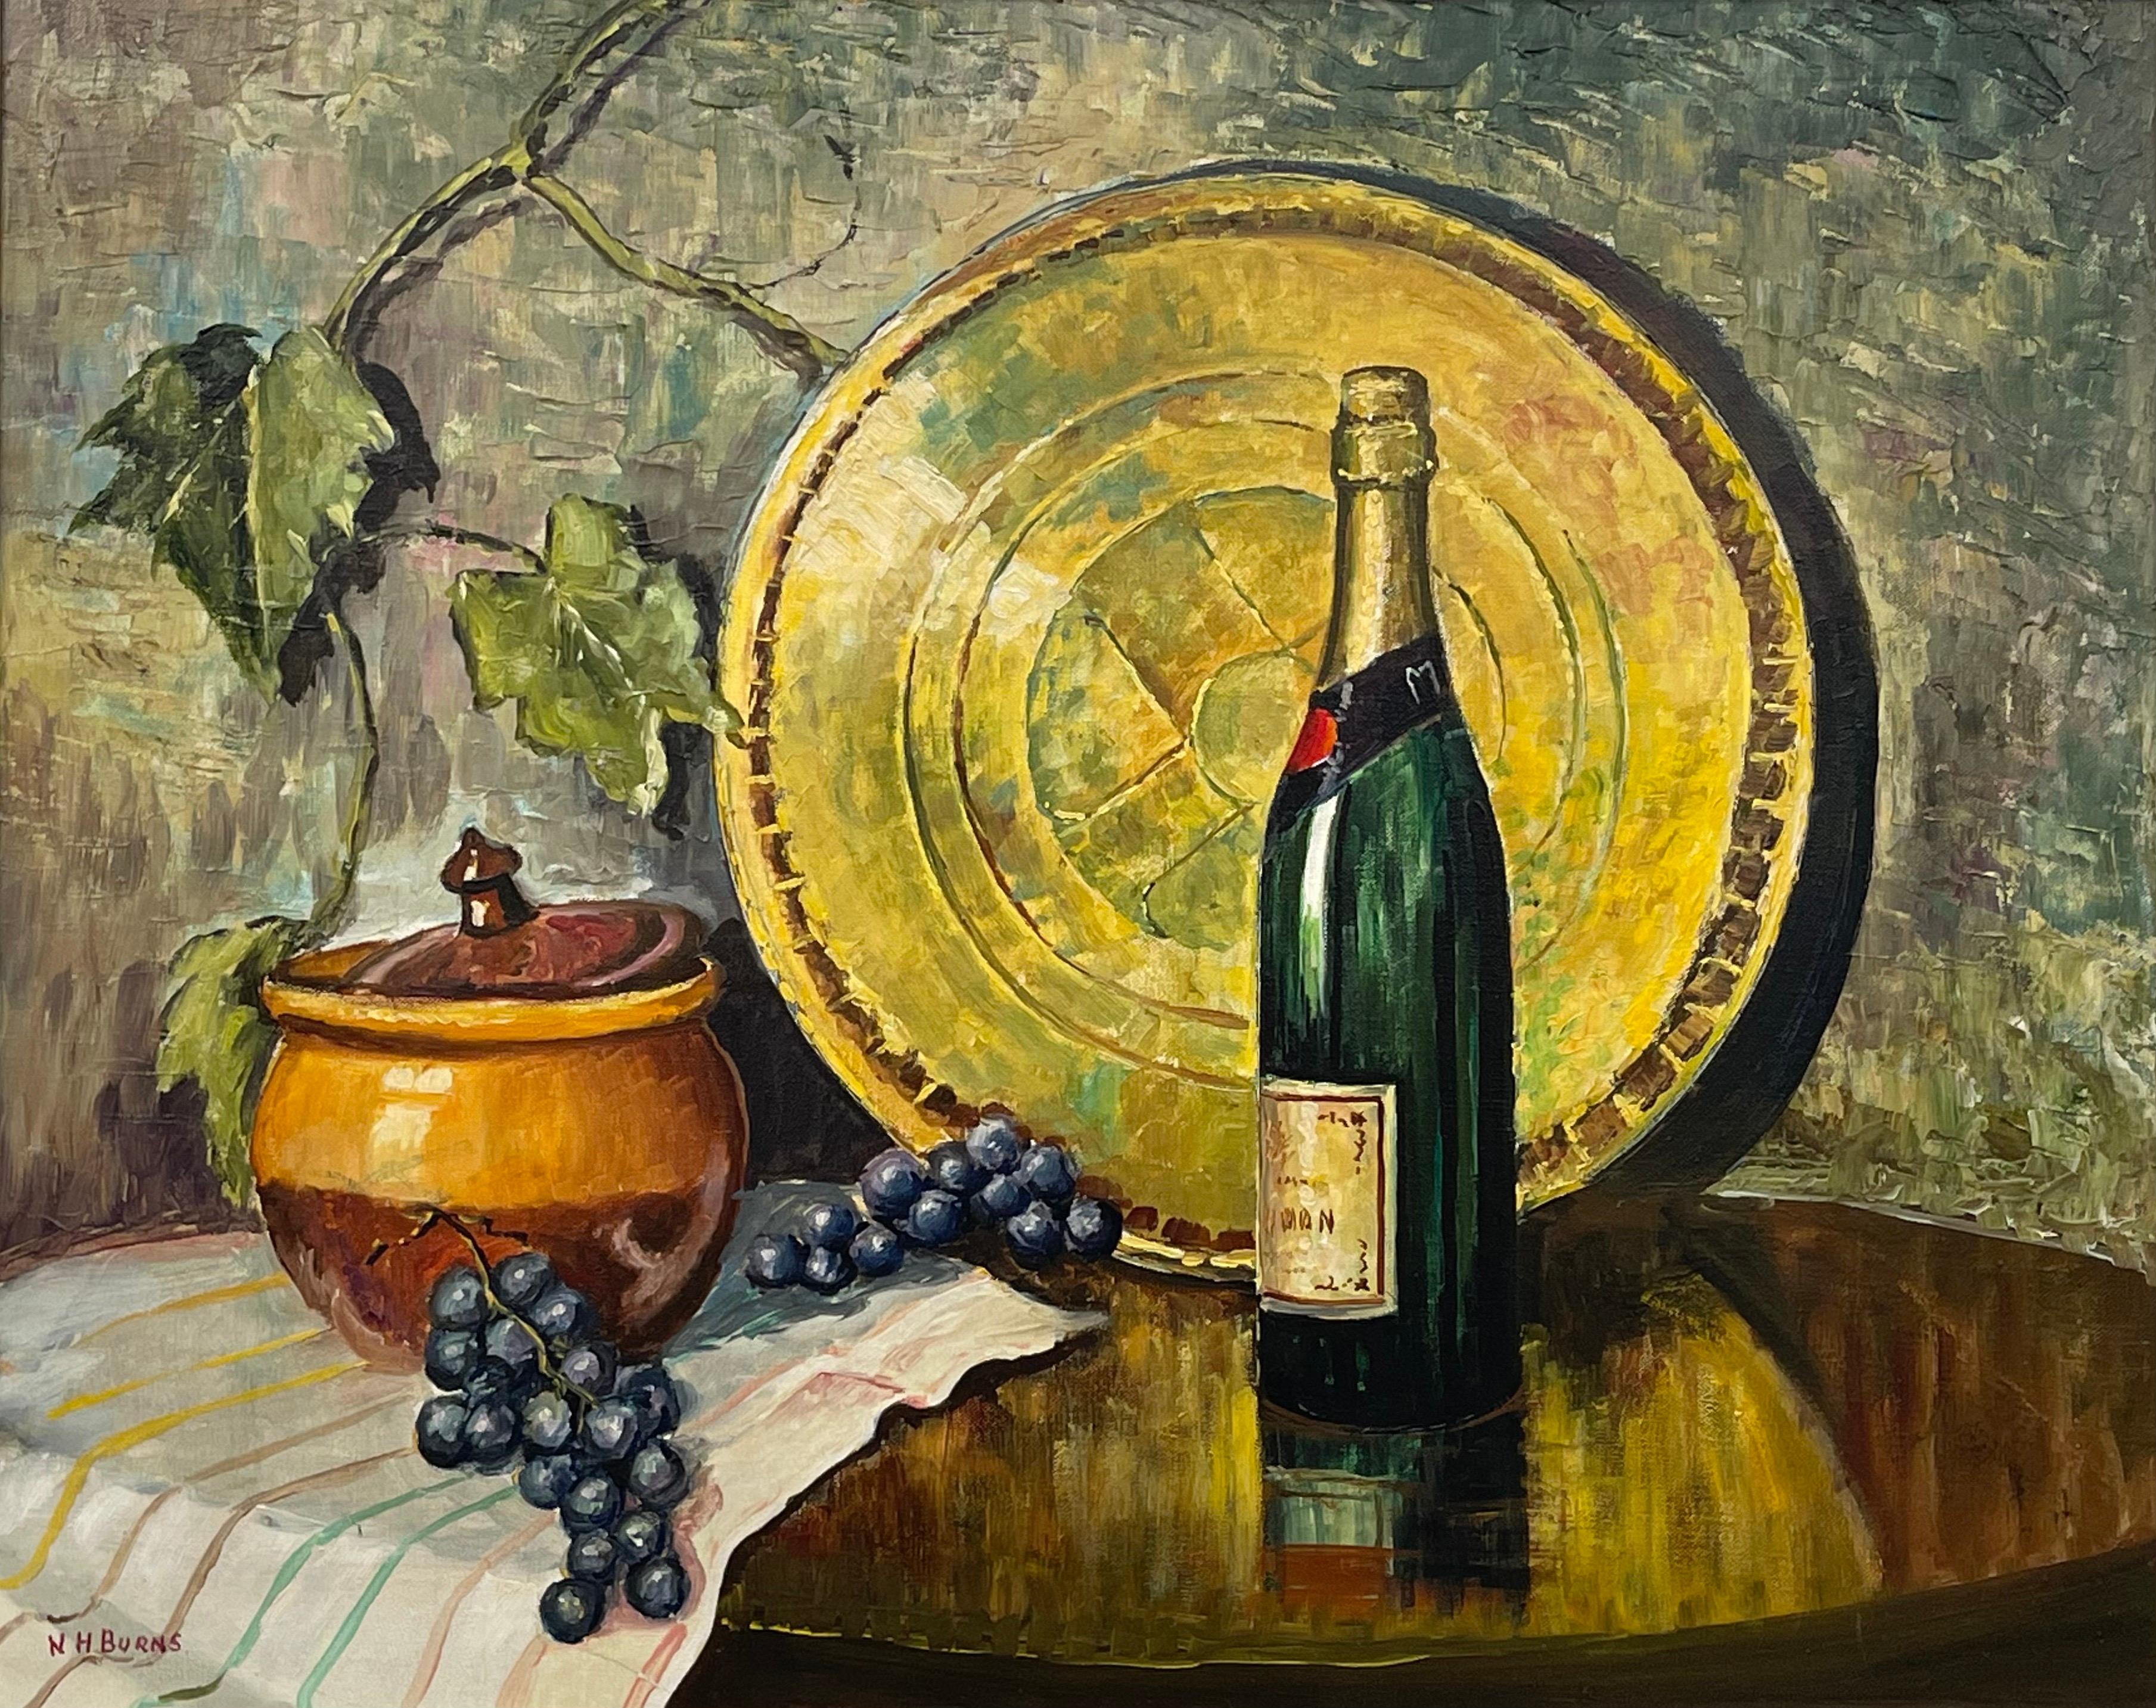 Champagne Bottle with Grapes Still Life Oil Painting by 20th Century Artist - Brown Still-Life Painting by William Henry Burns